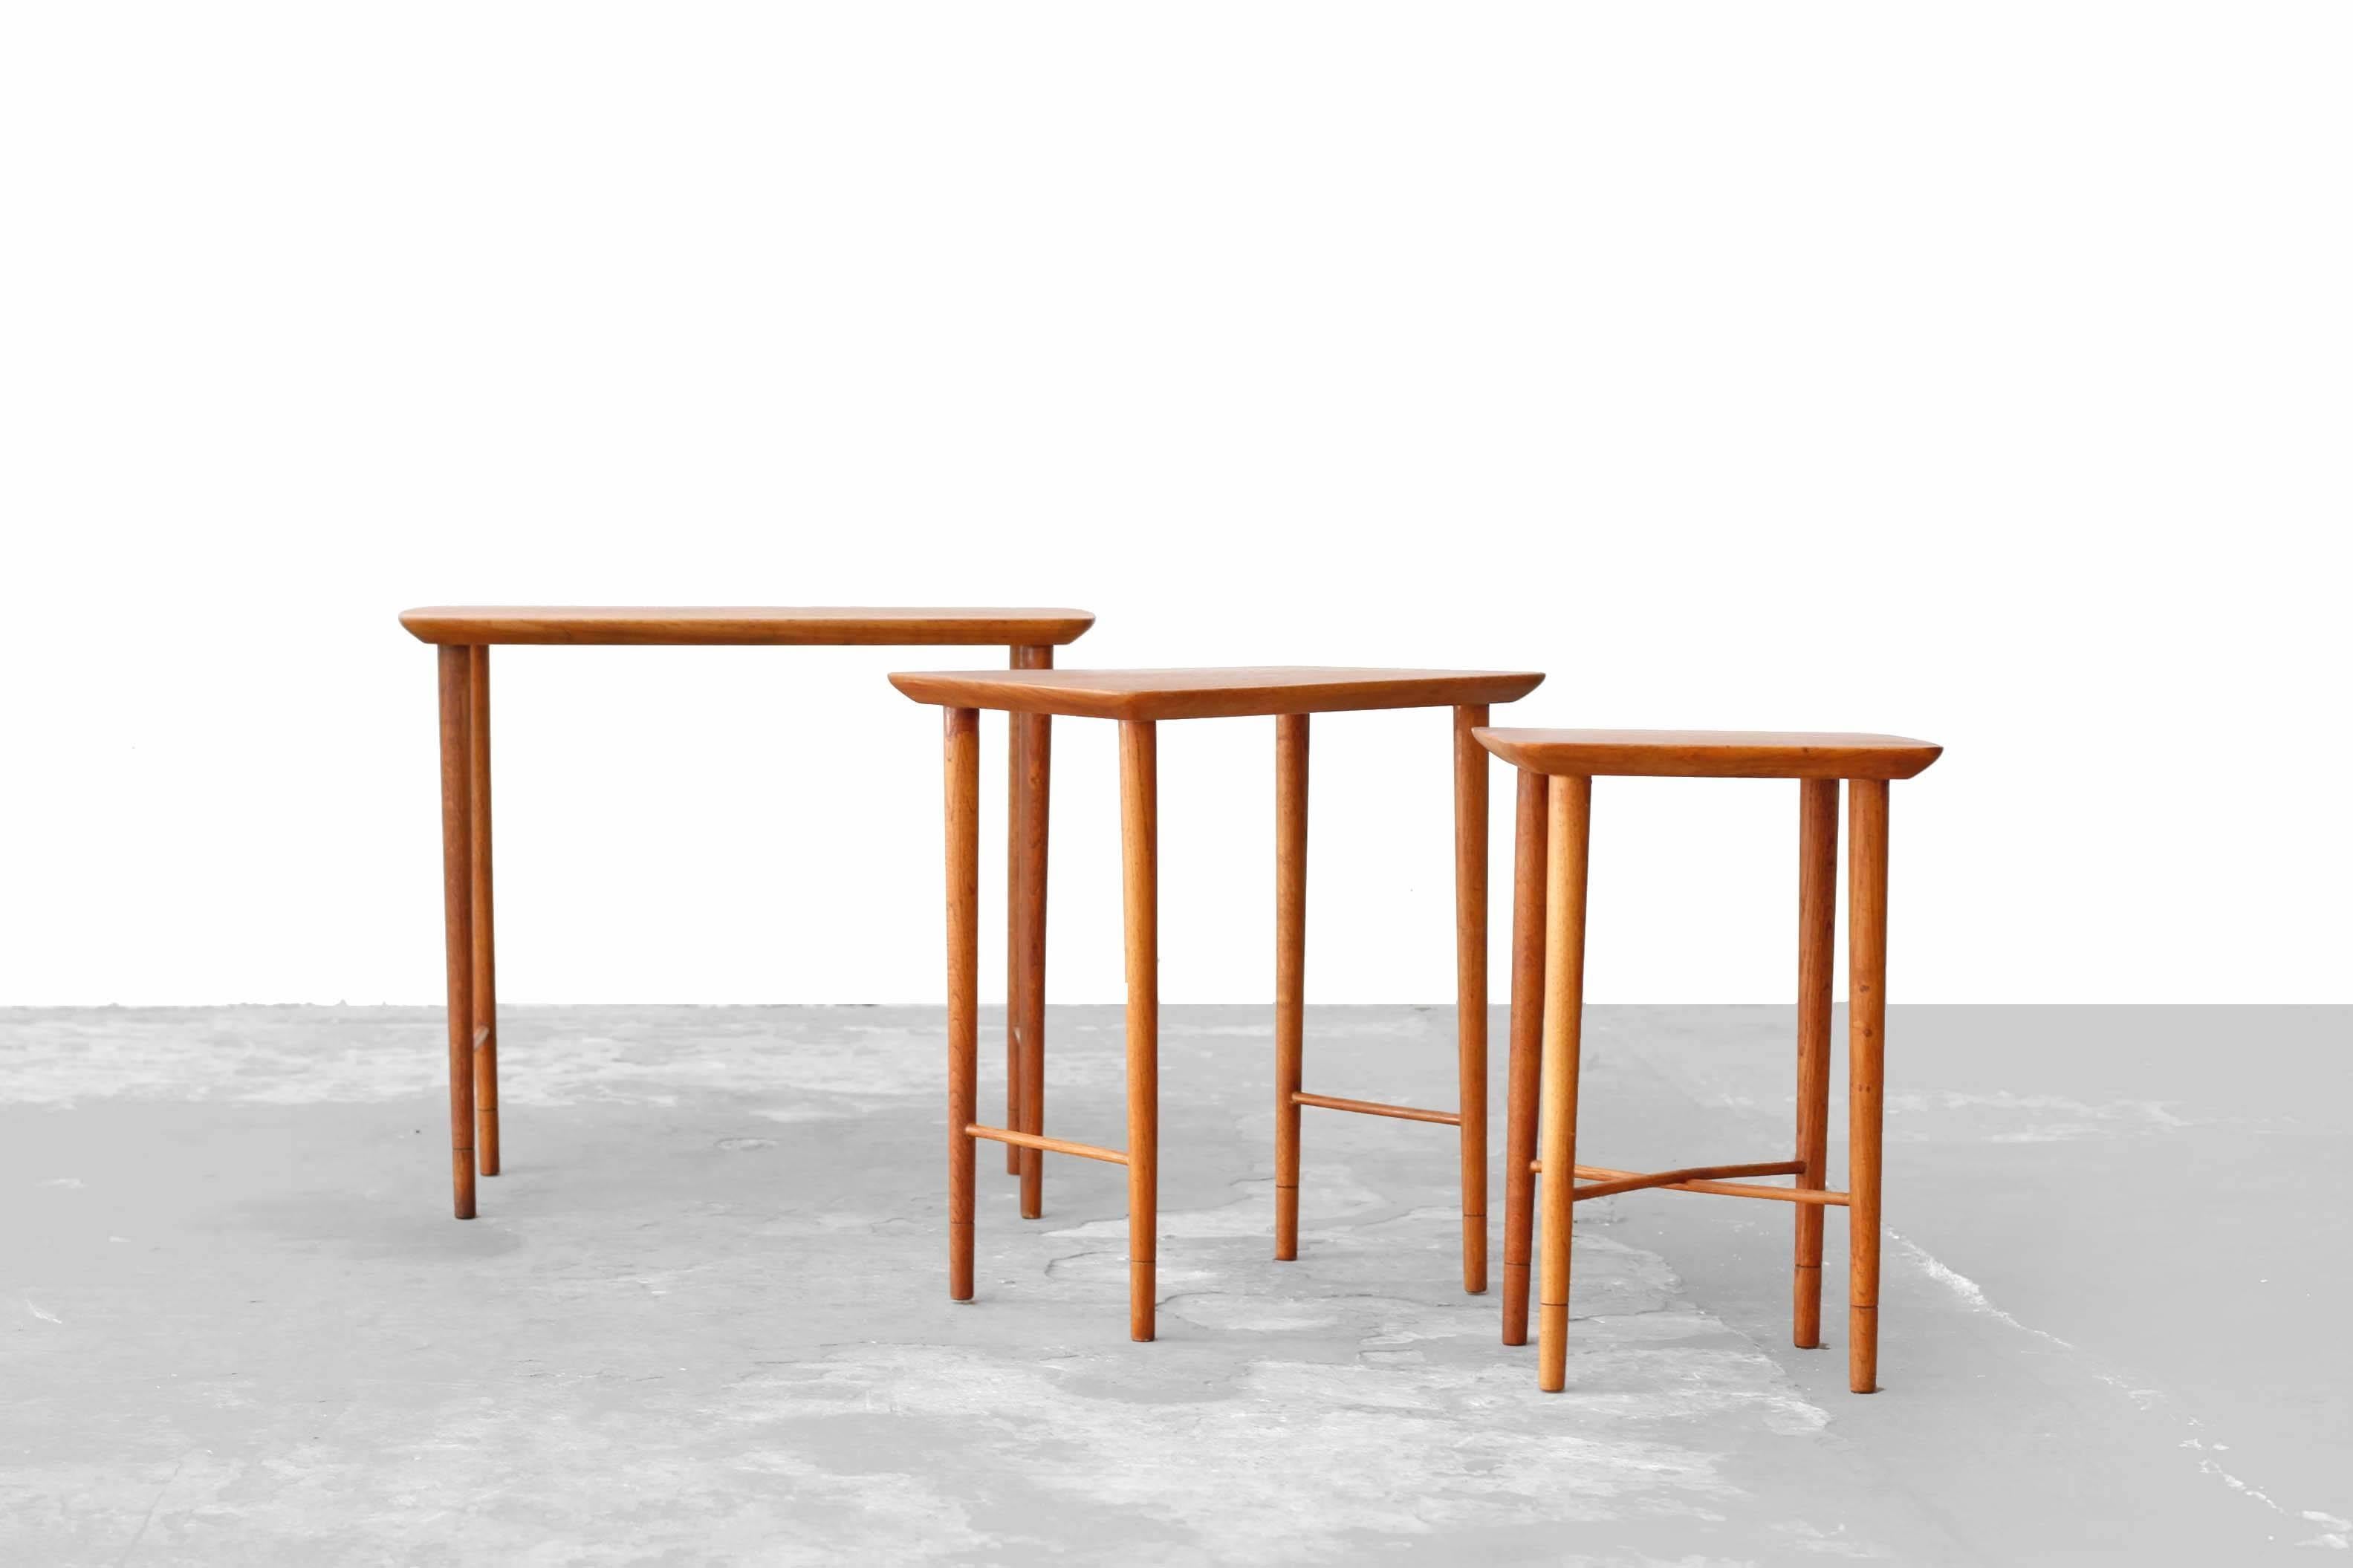 Beautiful teak and oak nesting tables.
Little wear consistent age and use.